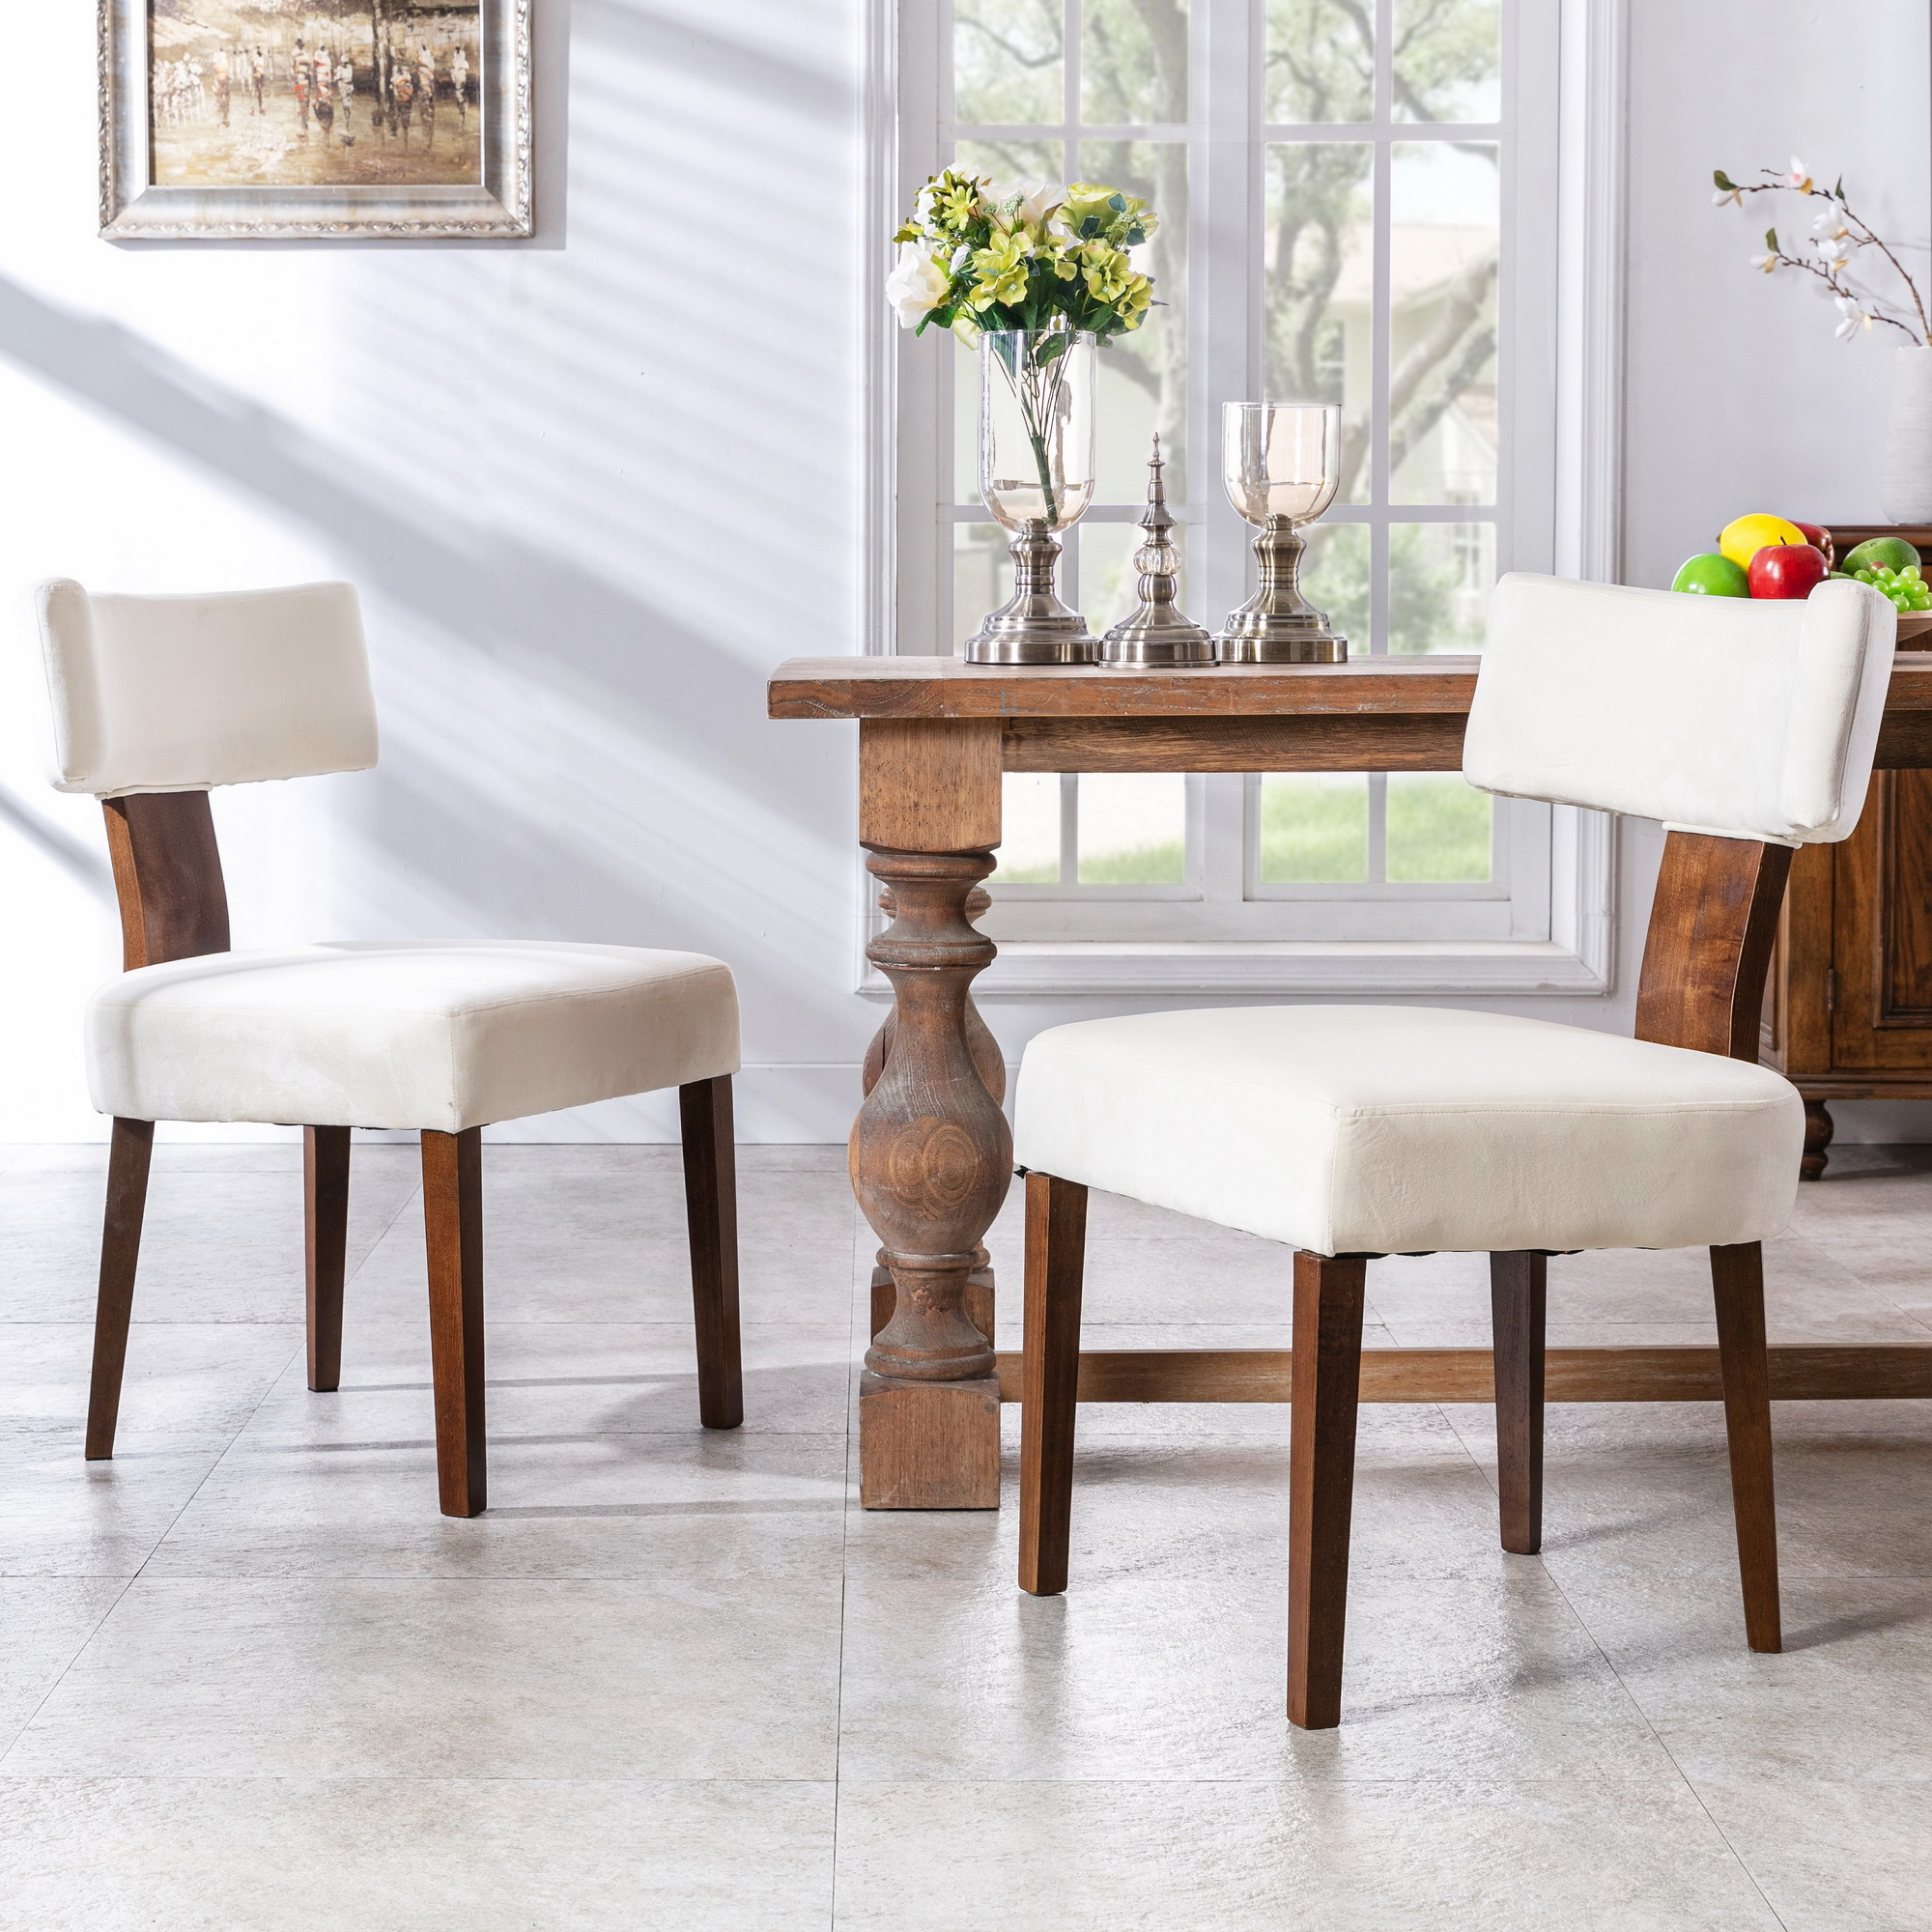 VESCASA Upholstered Dining Chairs with Wood Legs Set of 2